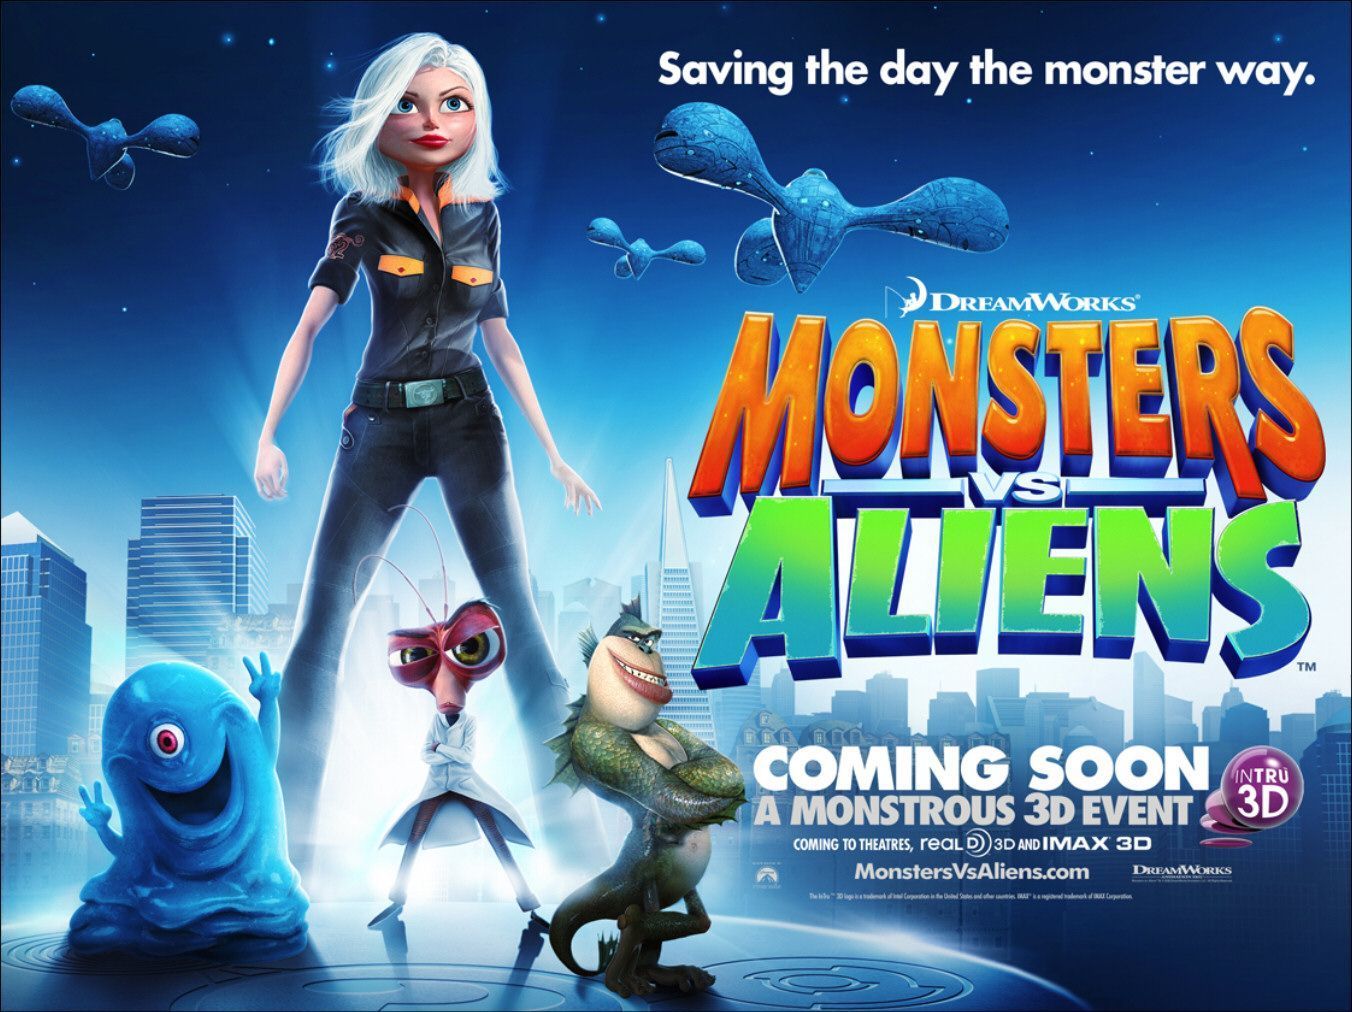 Monsters iens Movie Wallpaper. Monsters vs aliens, Animated movies for kids, Good animated movies